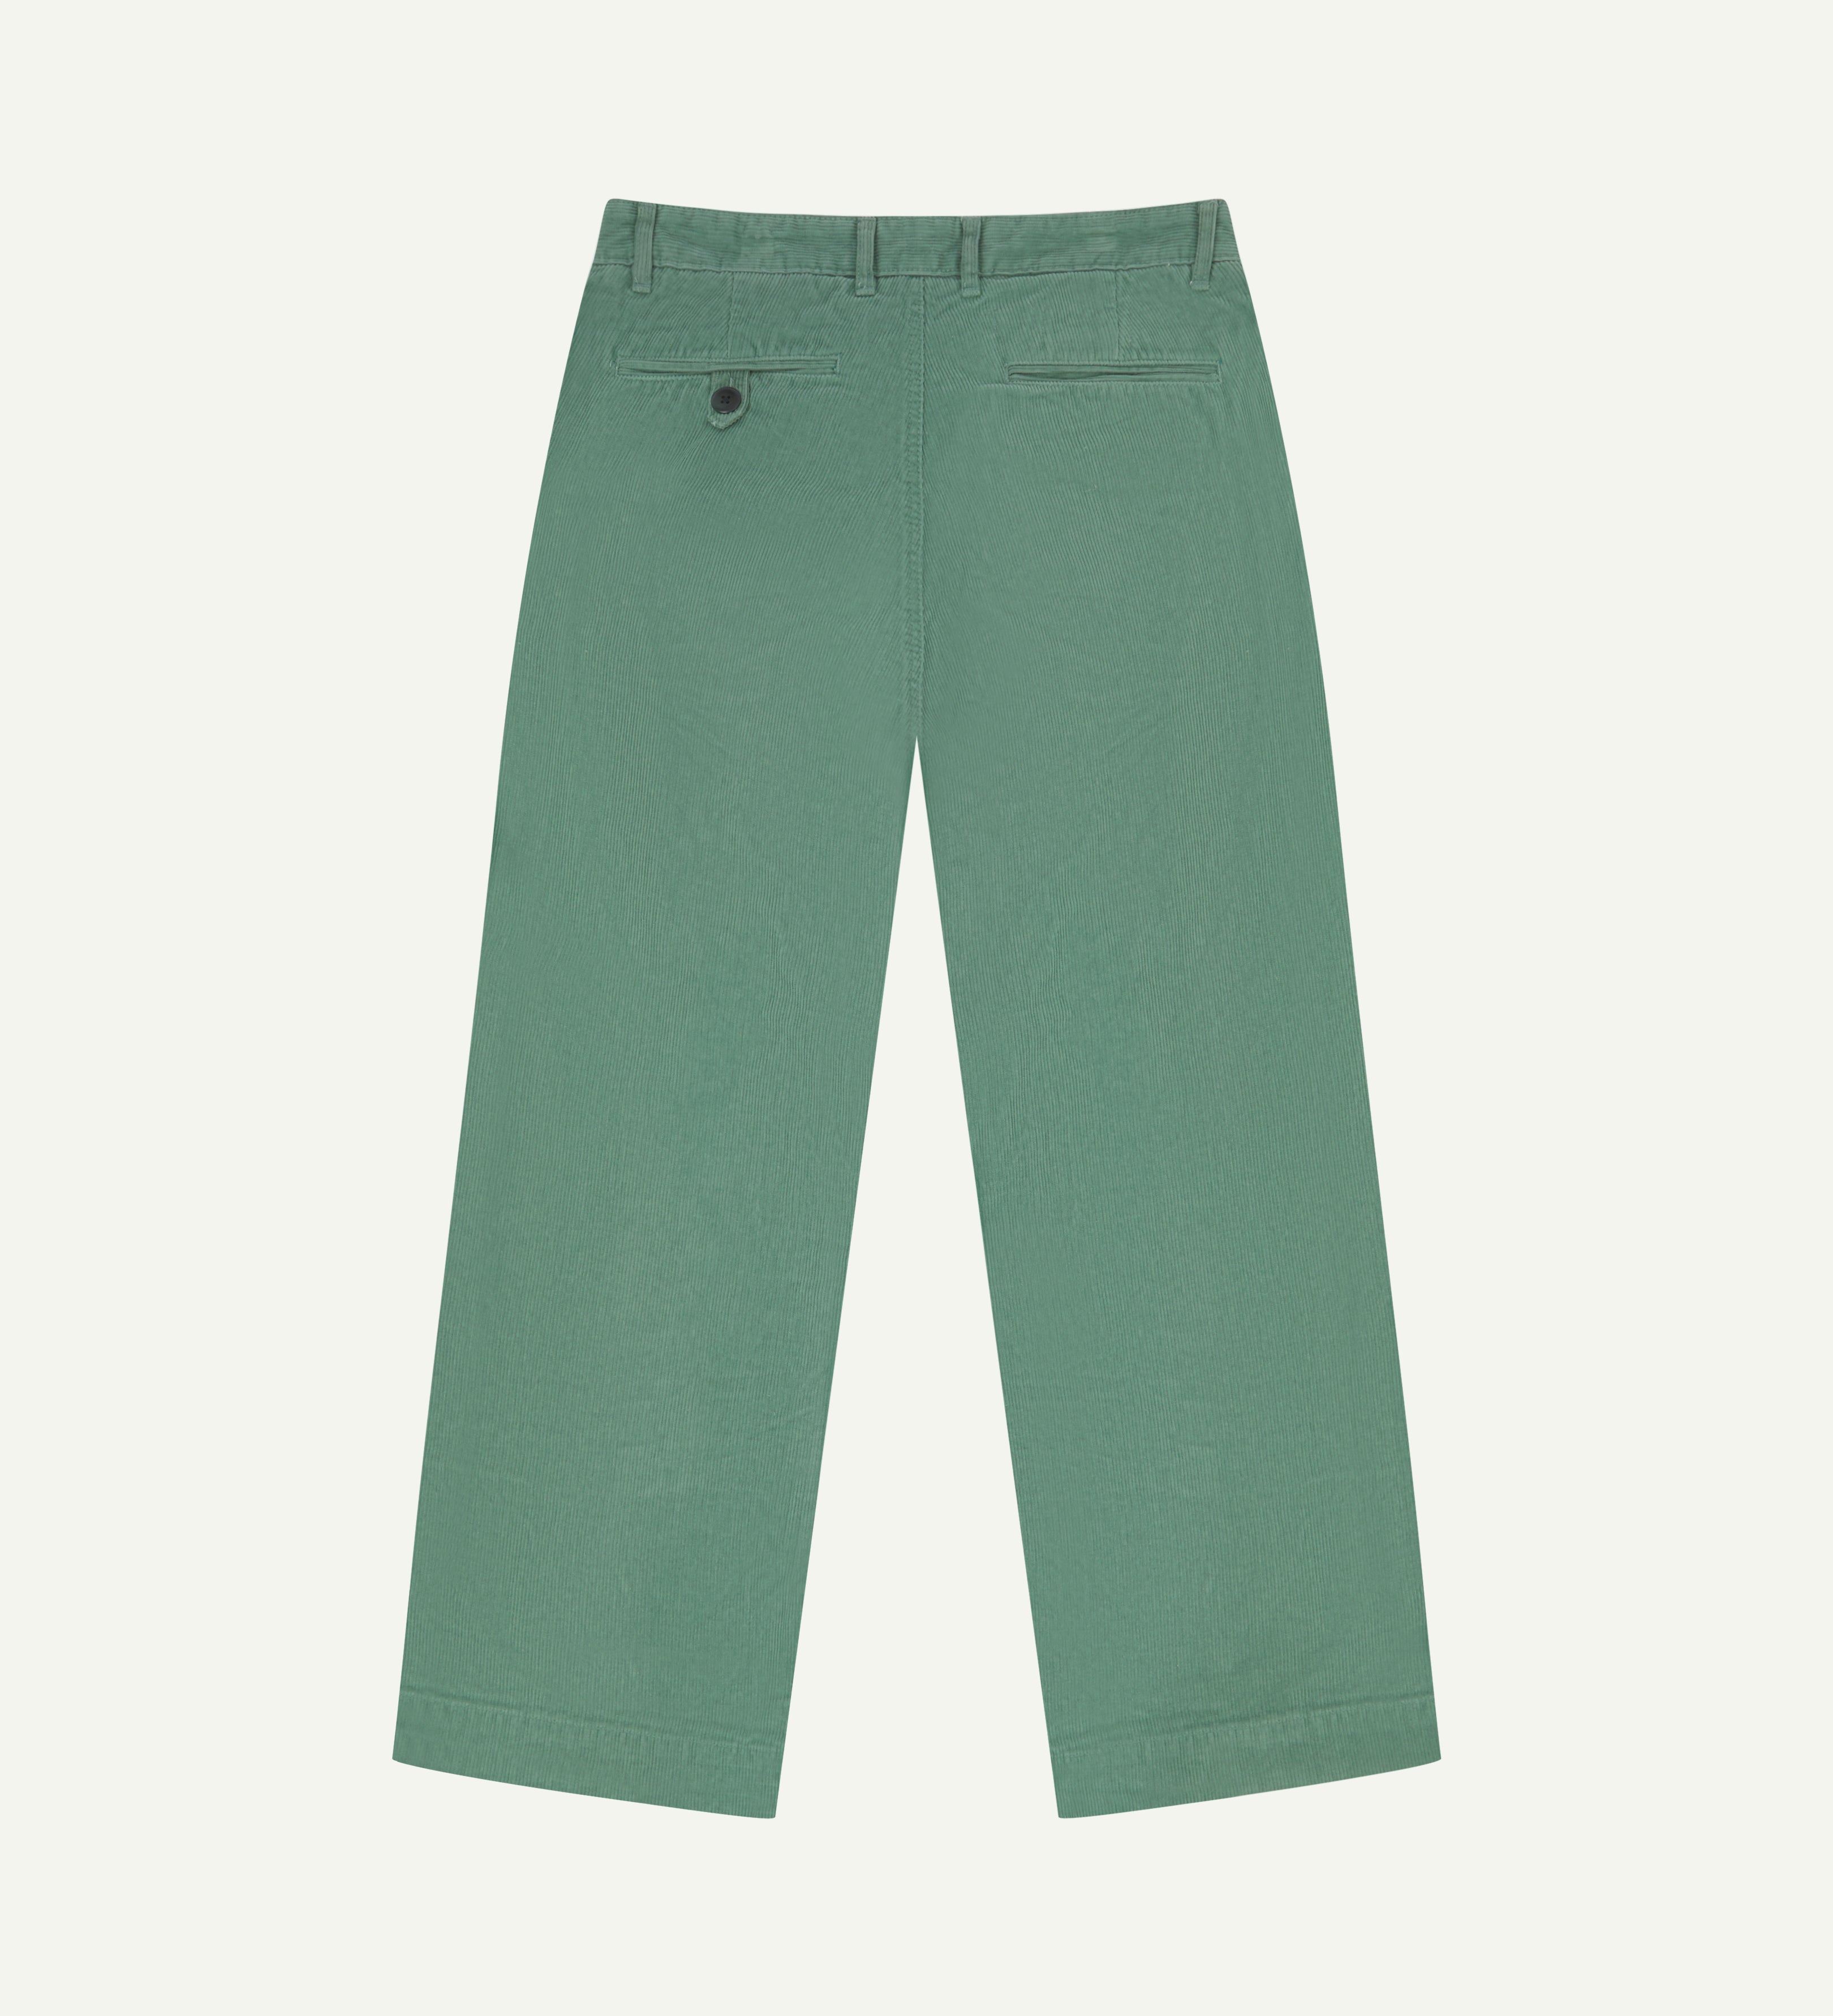 Back view of #5018 Uskees men's organic corduroy boat trousers in light green showing wide leg style and buttoned back pocket.